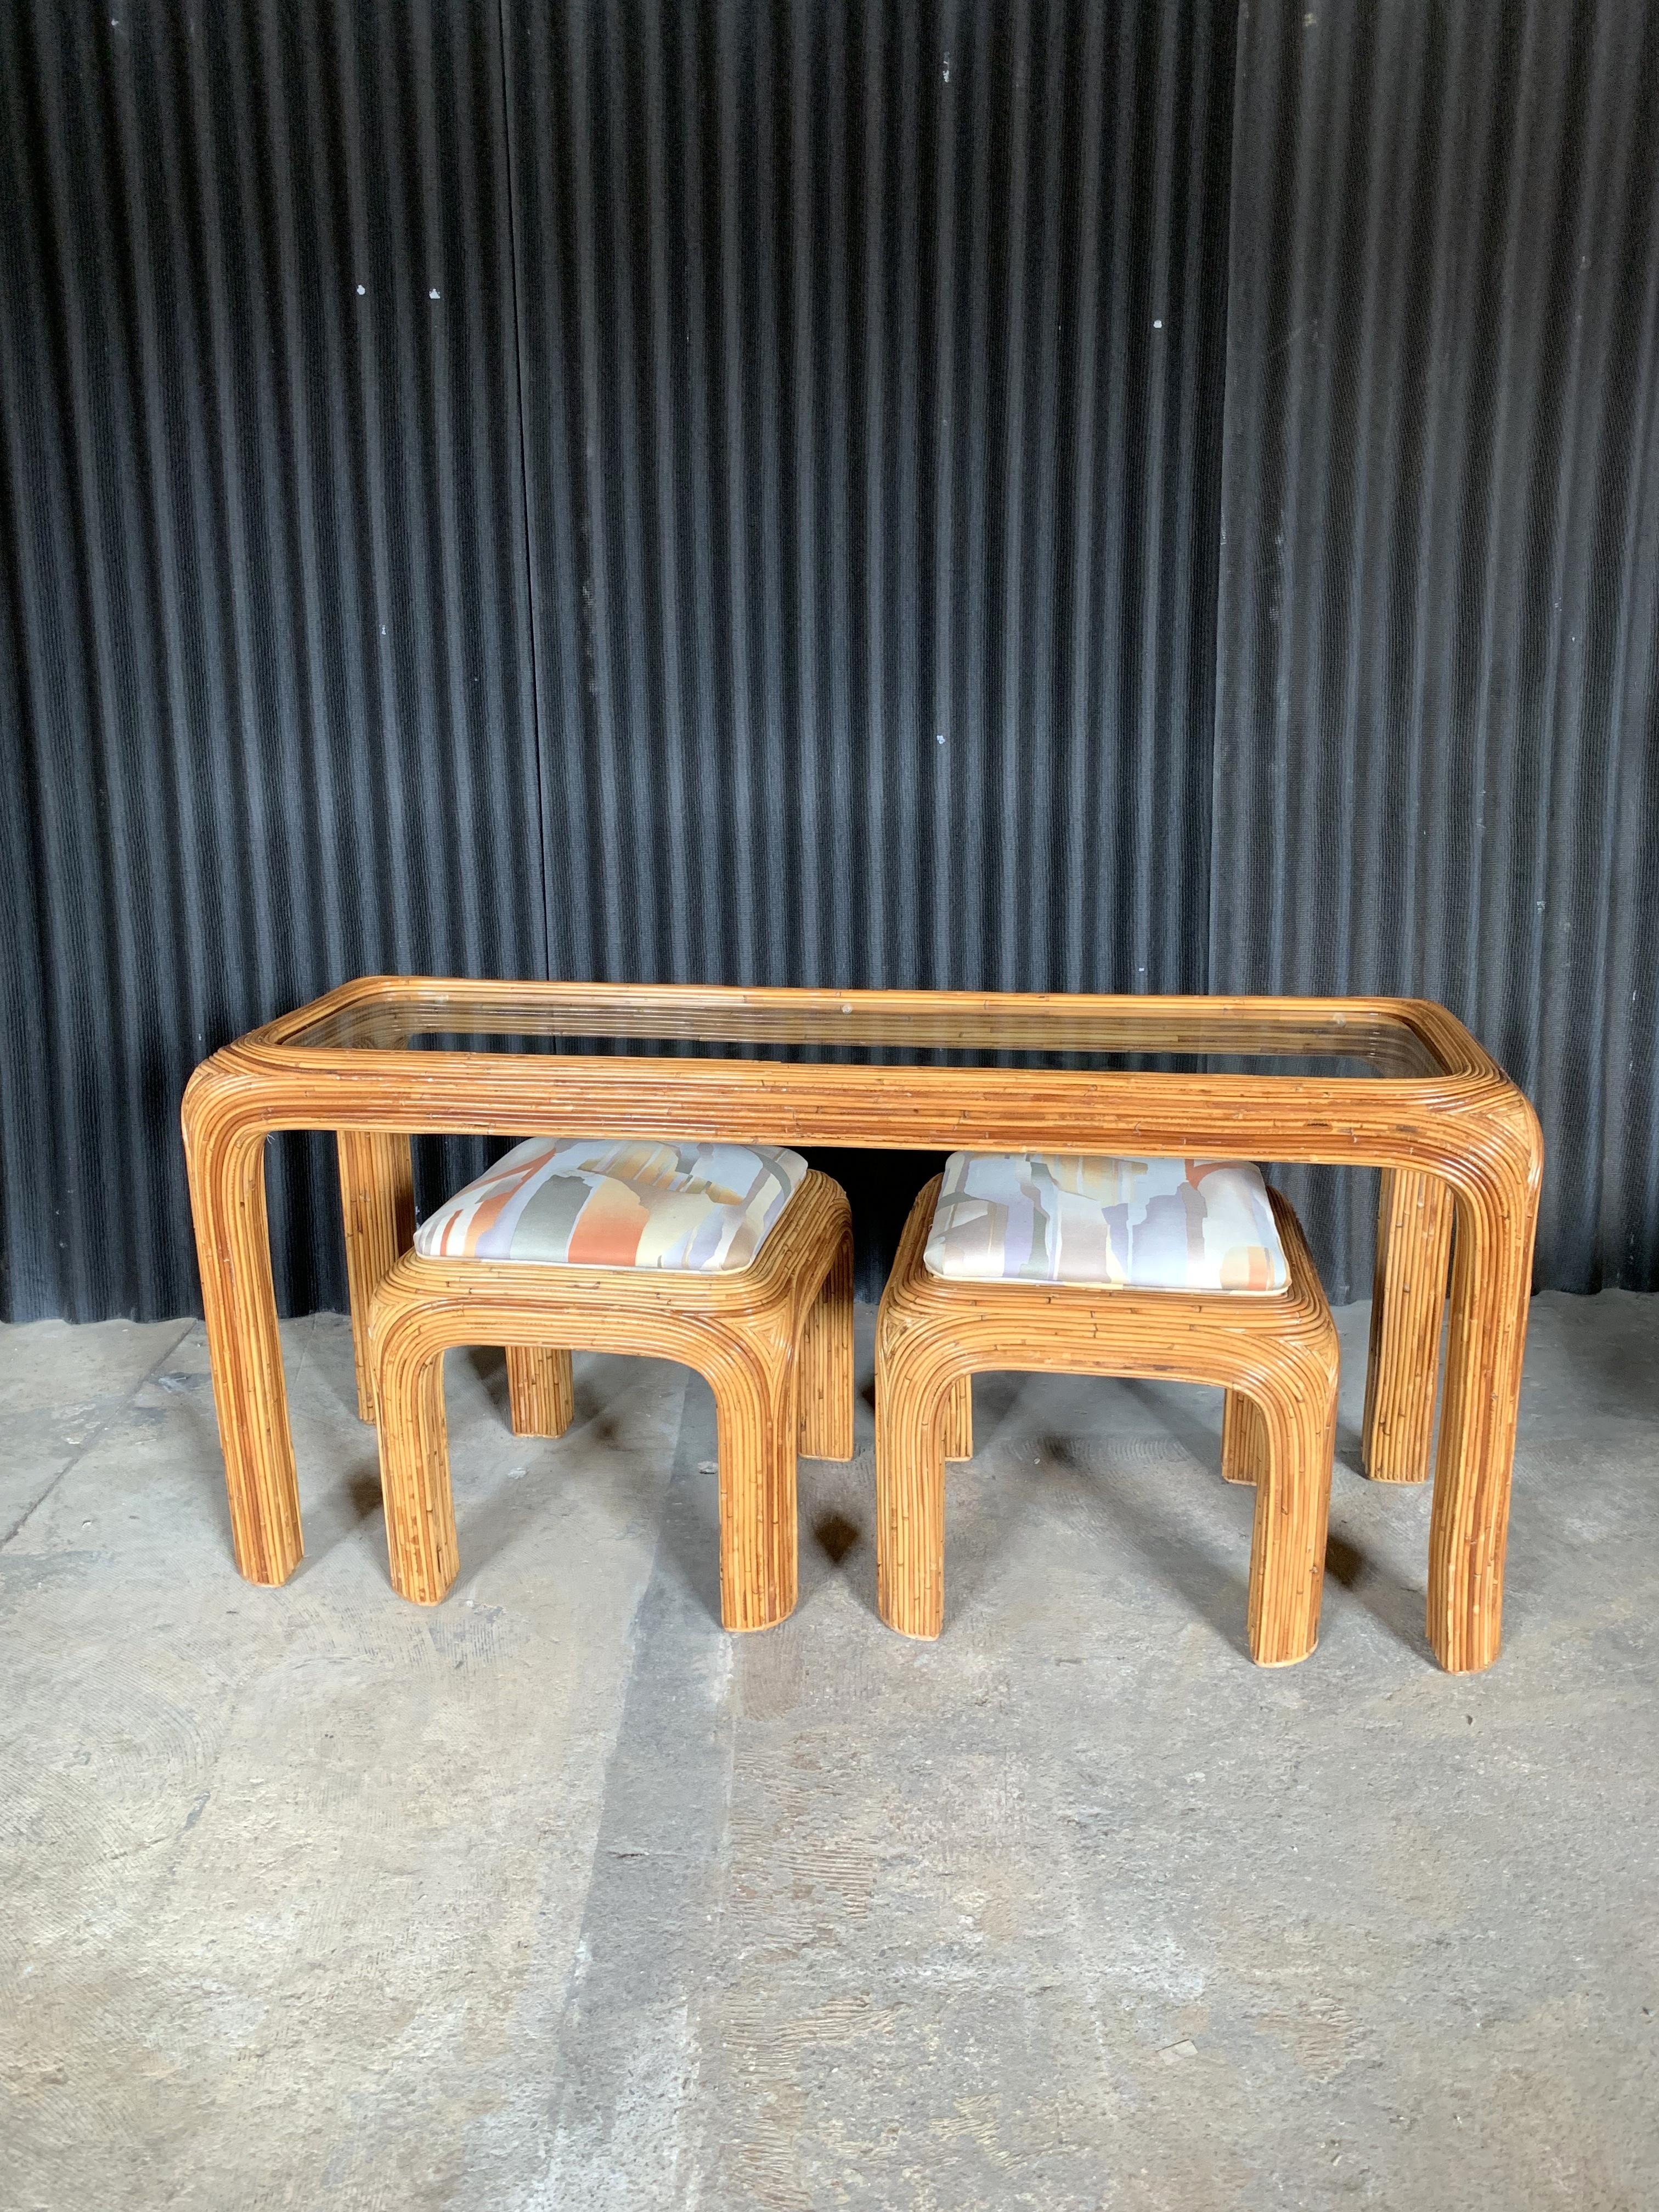 Rattan Pencil Reed Glass Shelf Console with Two Coordinating Benches